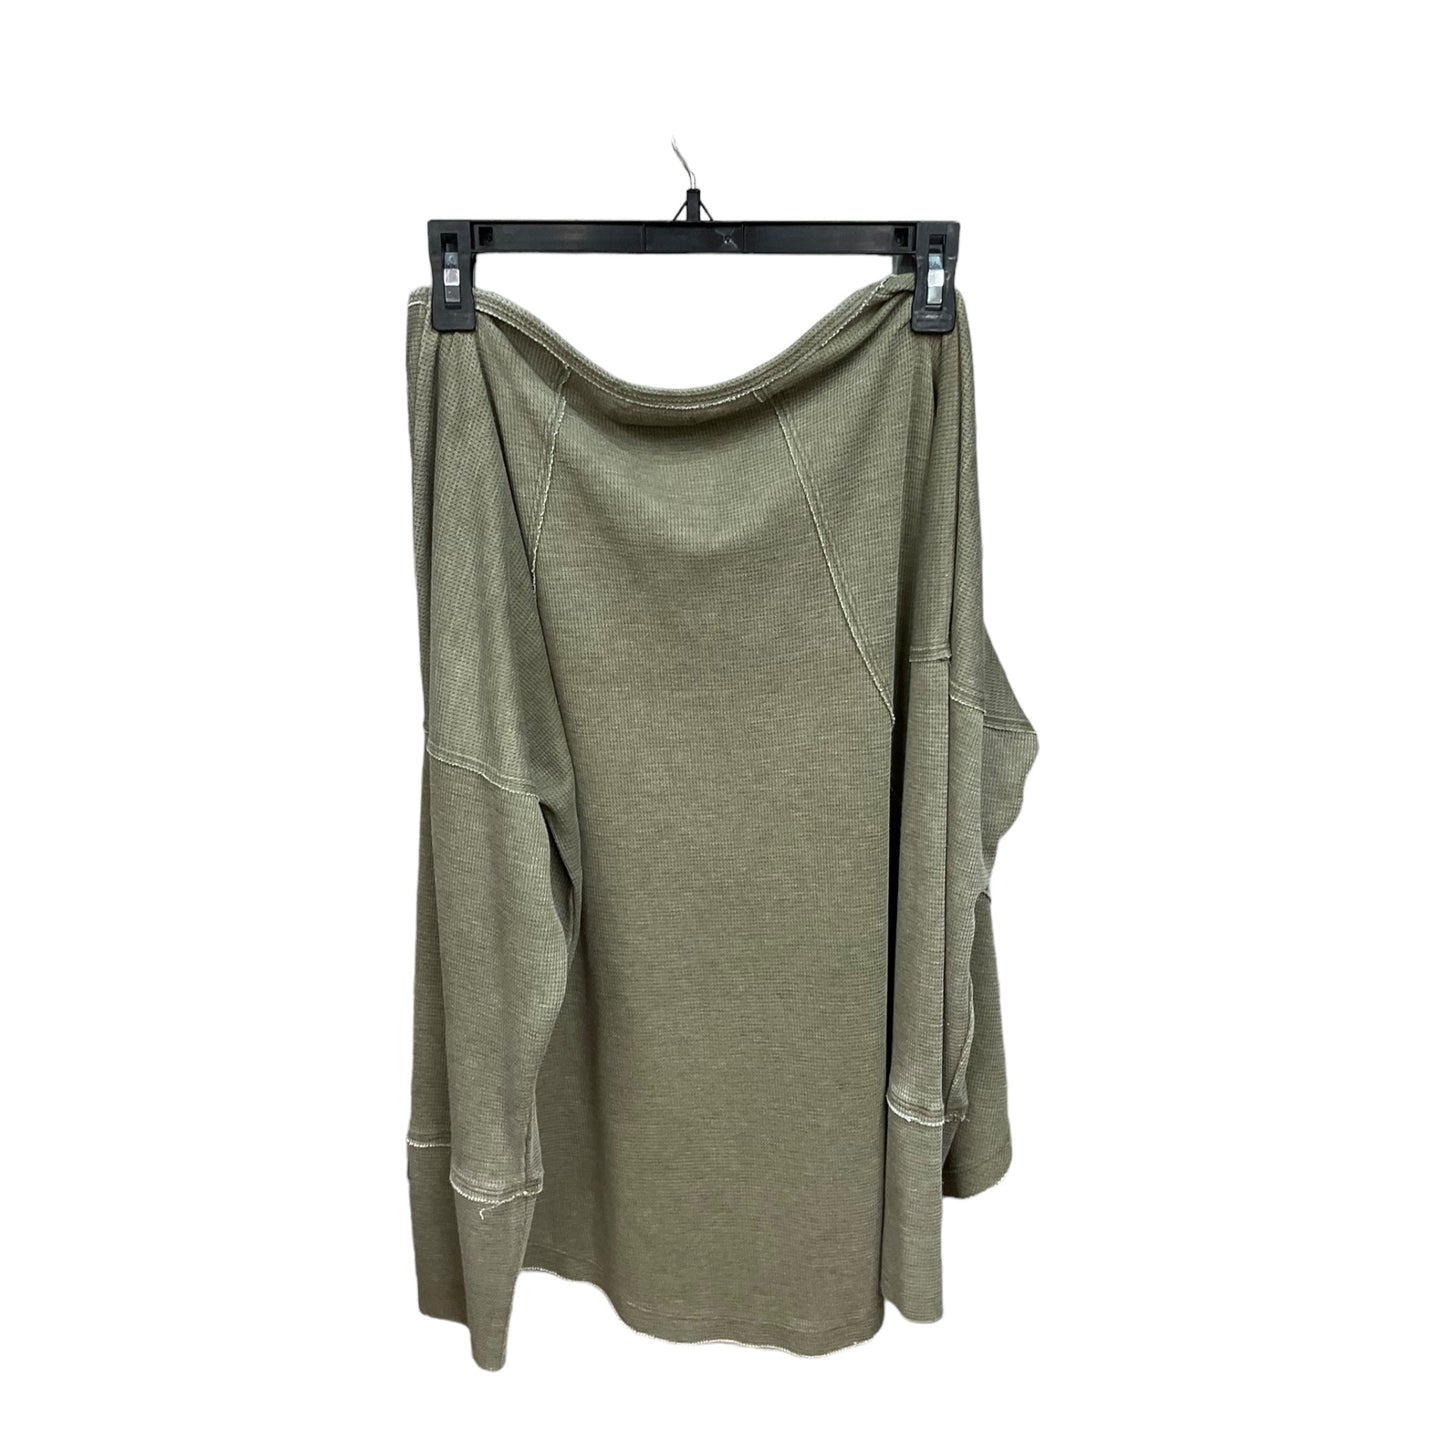 Olive Top Long Sleeve Lucky Brand, Size 1x